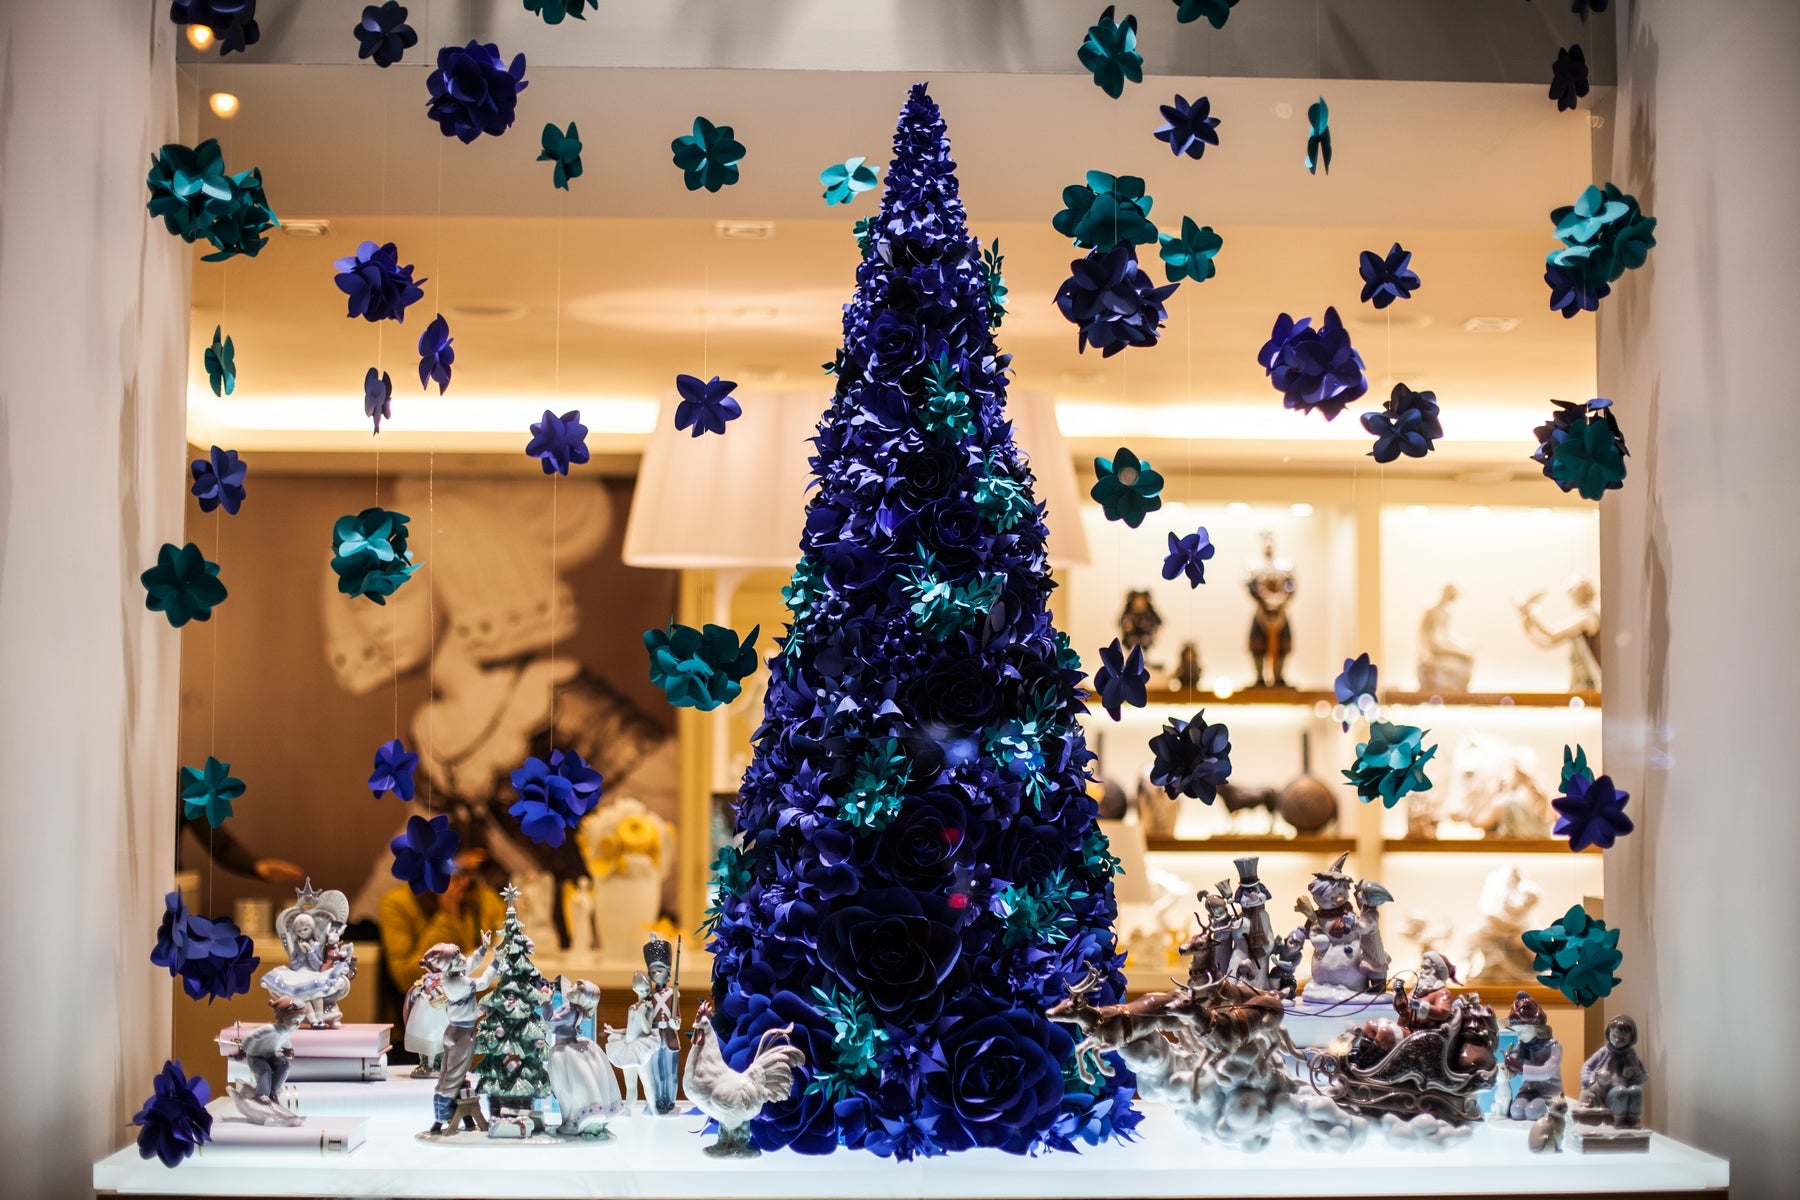 Eye-catching winter display featuring a meticulously crafted paper flower Christmas tree in stunning shades of ultramarine blue and turquoise blue, accented by cascading paper hydrangeas.